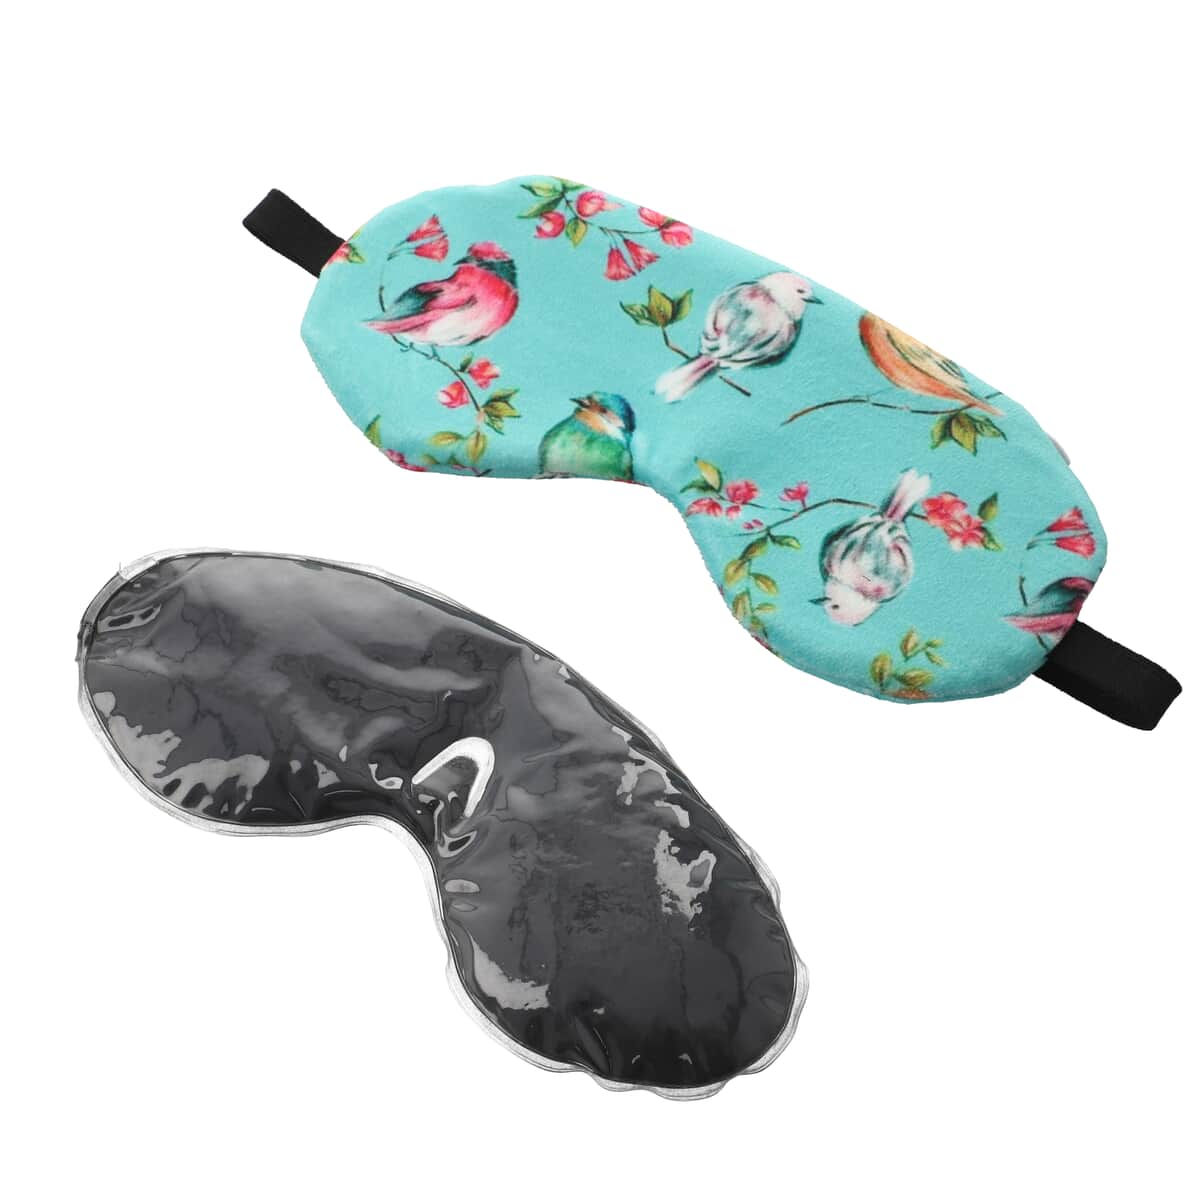 Multi Color Printed Cotton, Shungite Weighted Reusable Eye Mask (L8xW3) with Shungite Gel Sleeve and Adjustable Strap image number 0